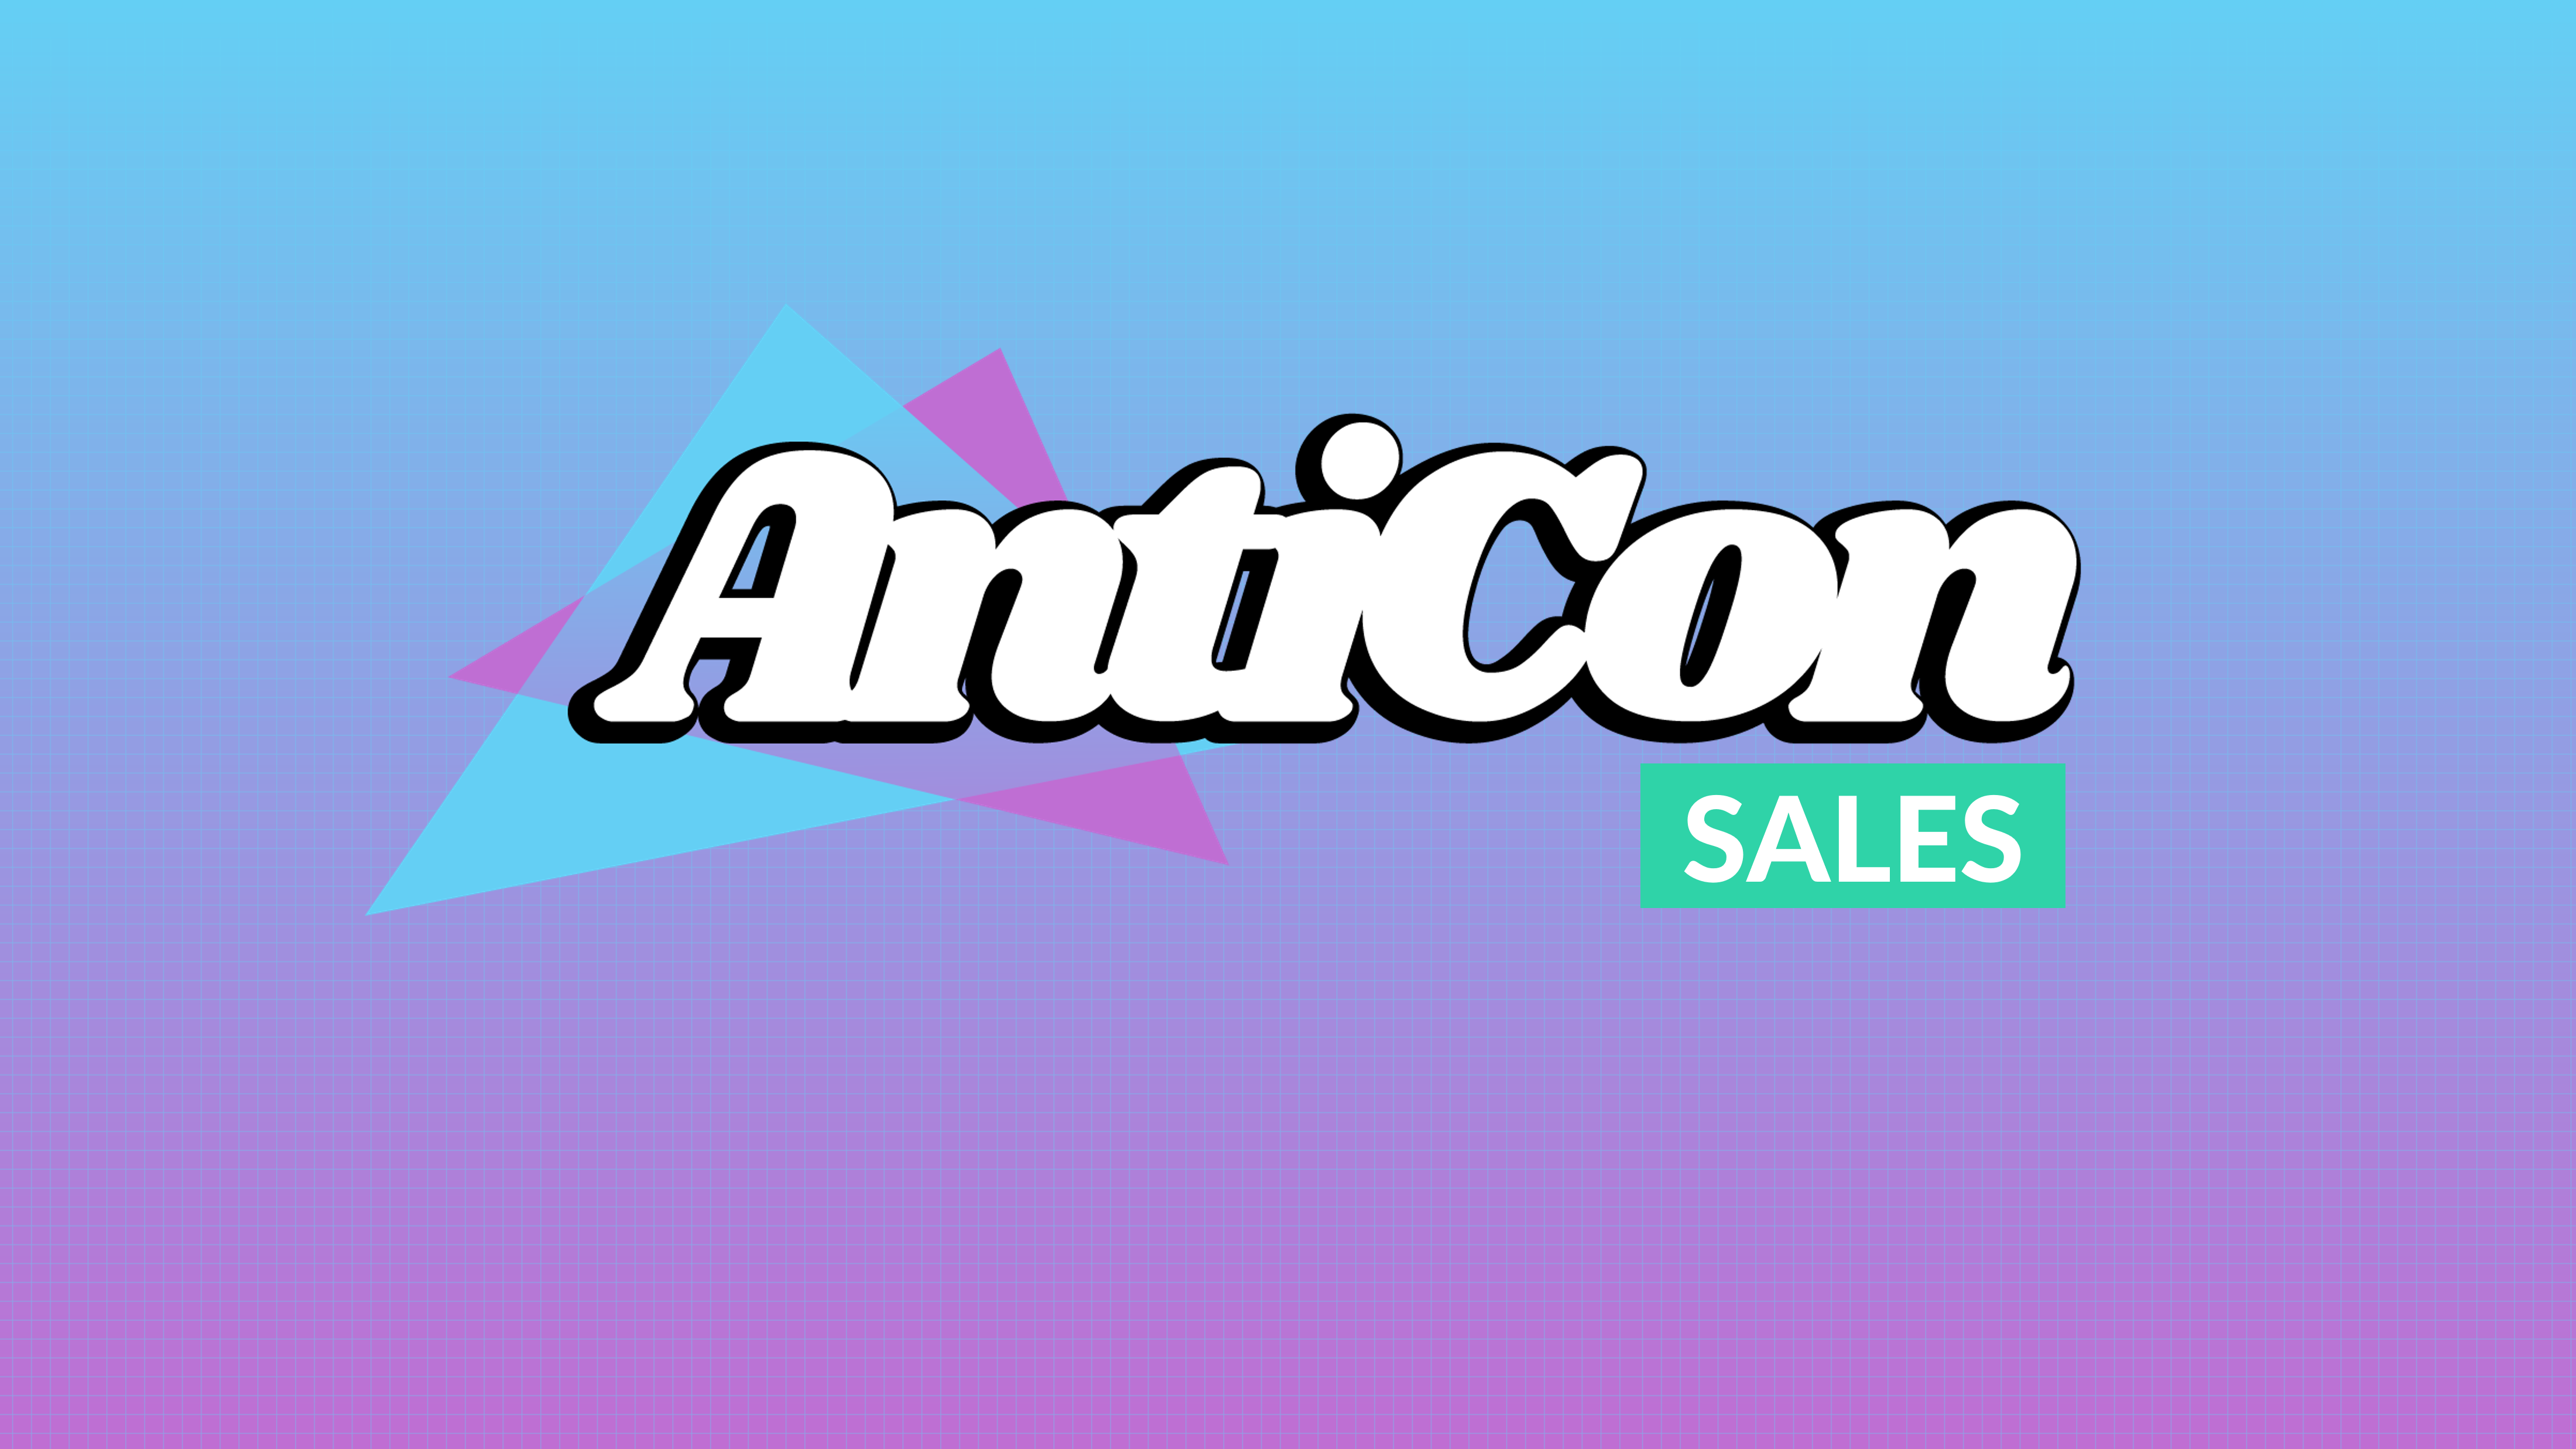 Anticon sales with background